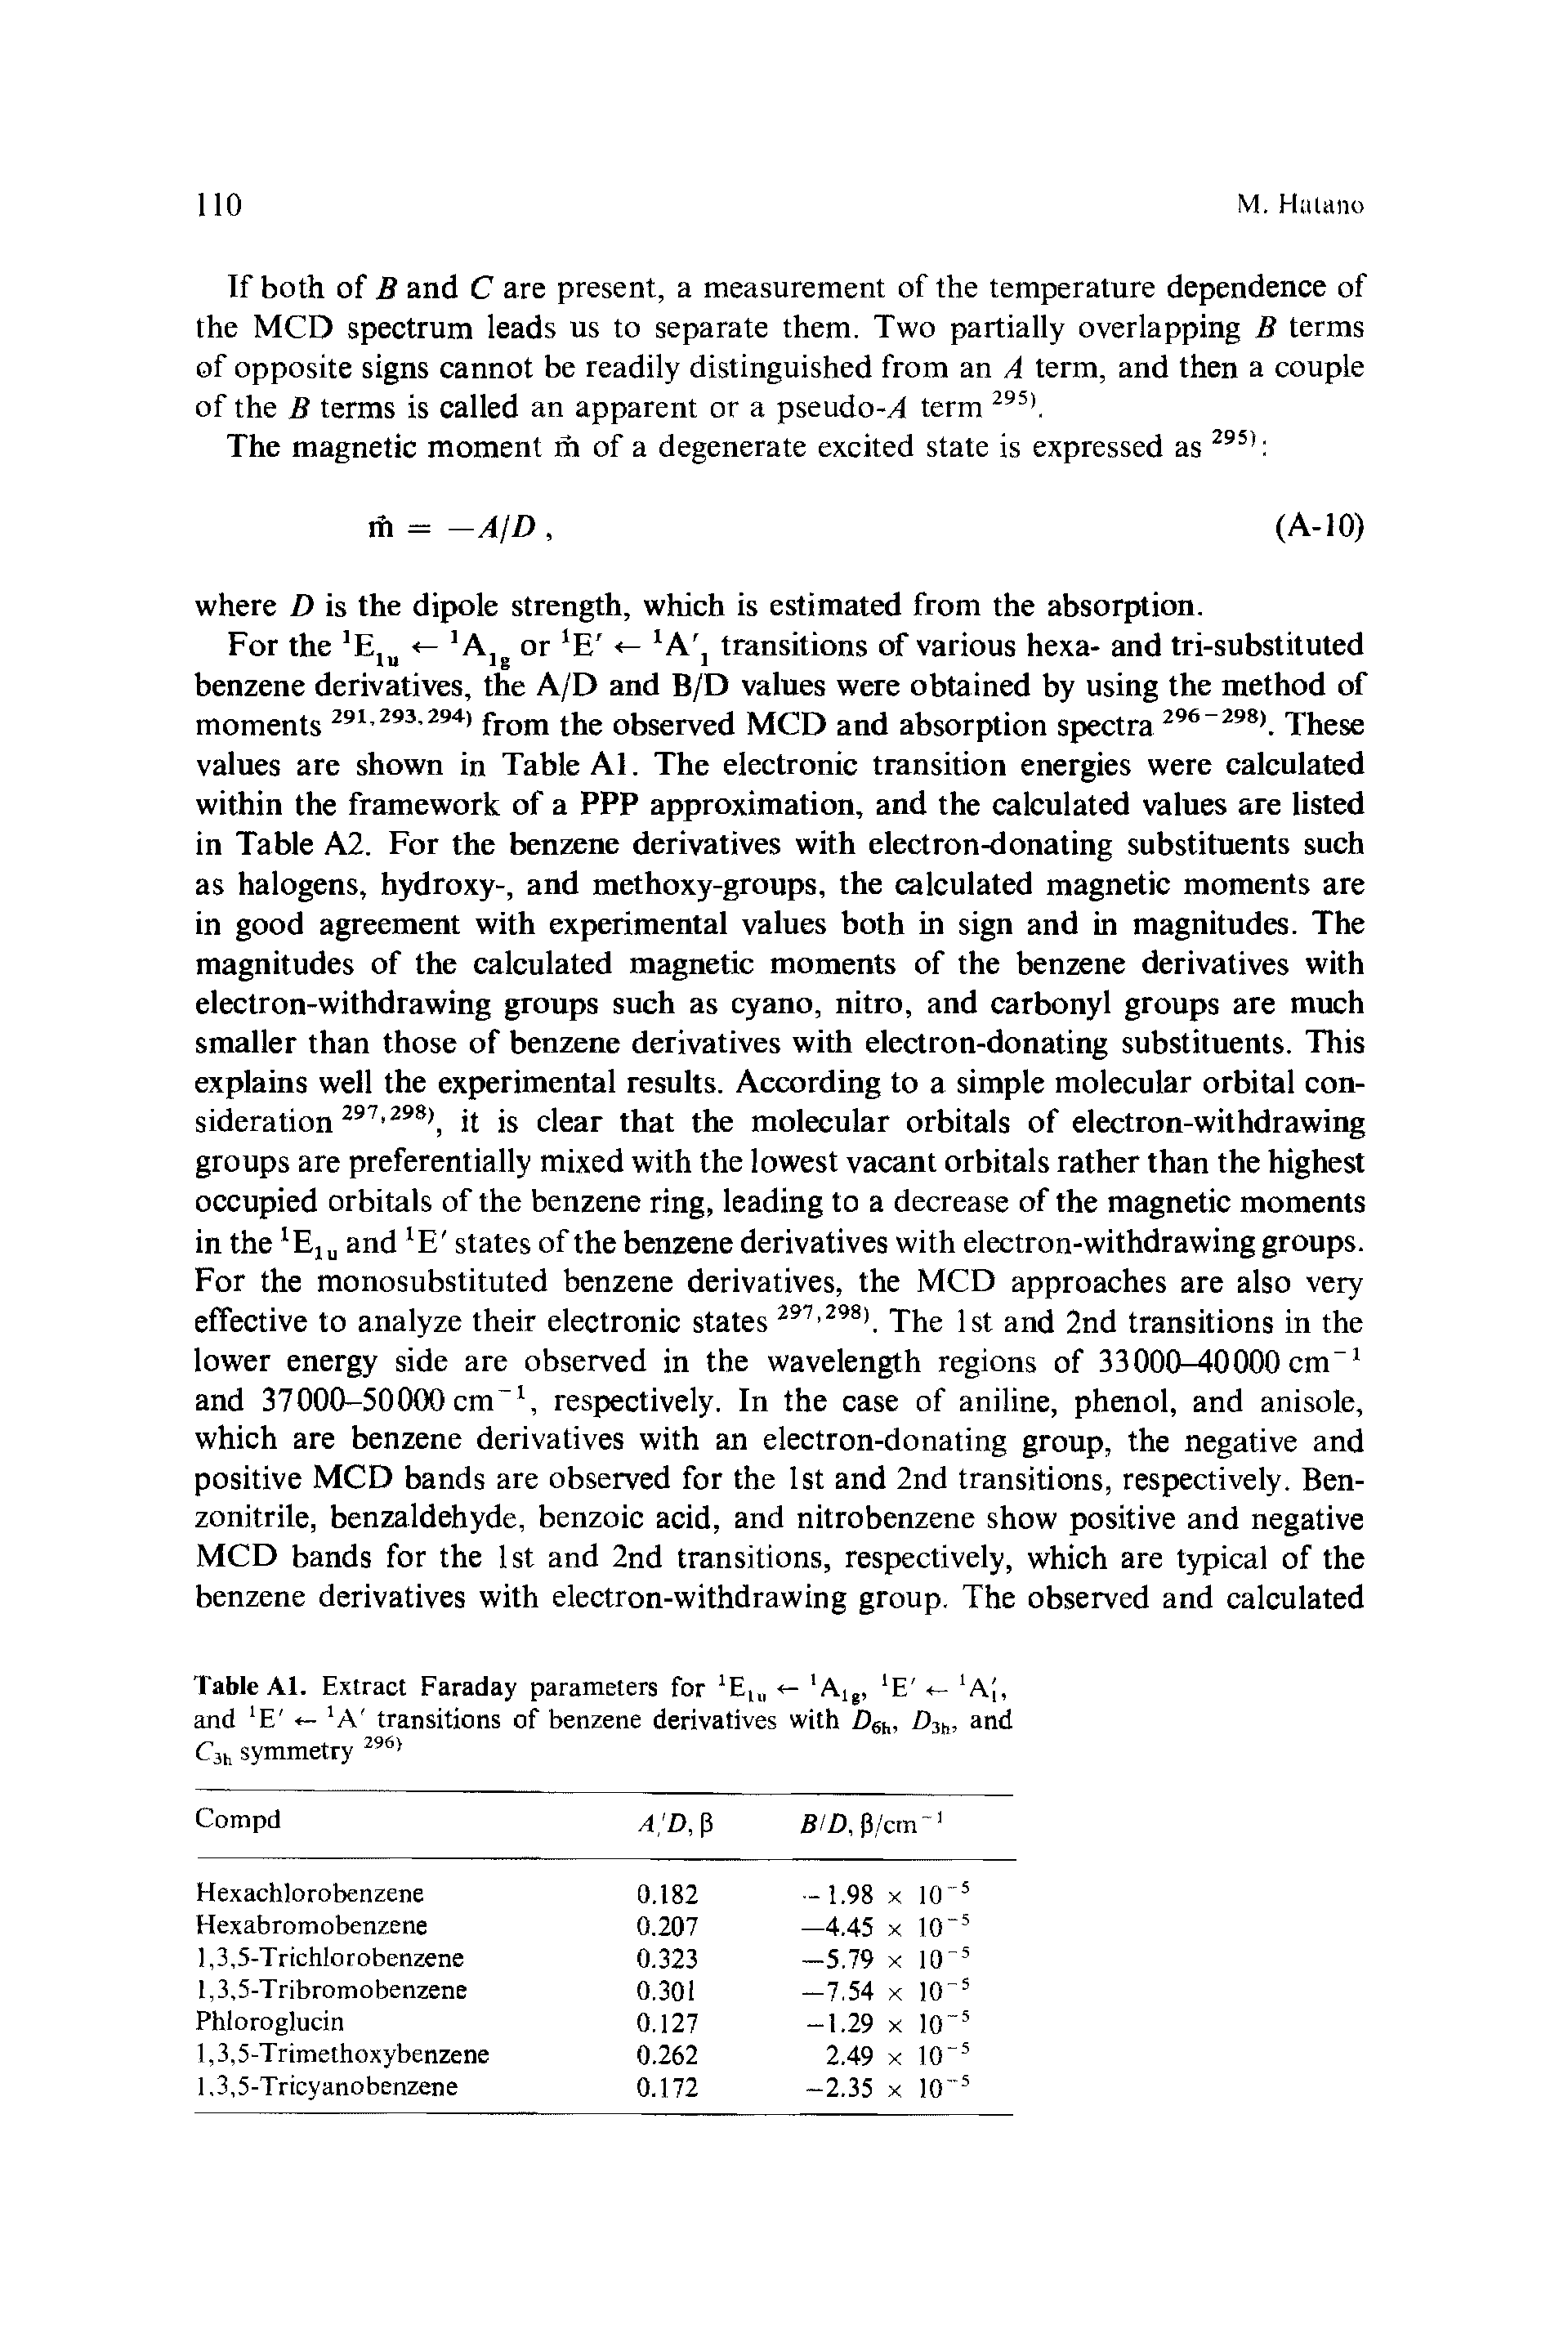 Table Al. Extract Faraday parameters for 1Elu <- Alg, E 1AJ, and E <- A transitions of benzene derivatives with Z)6h, Z)3b, and C3h symmetry 296>...